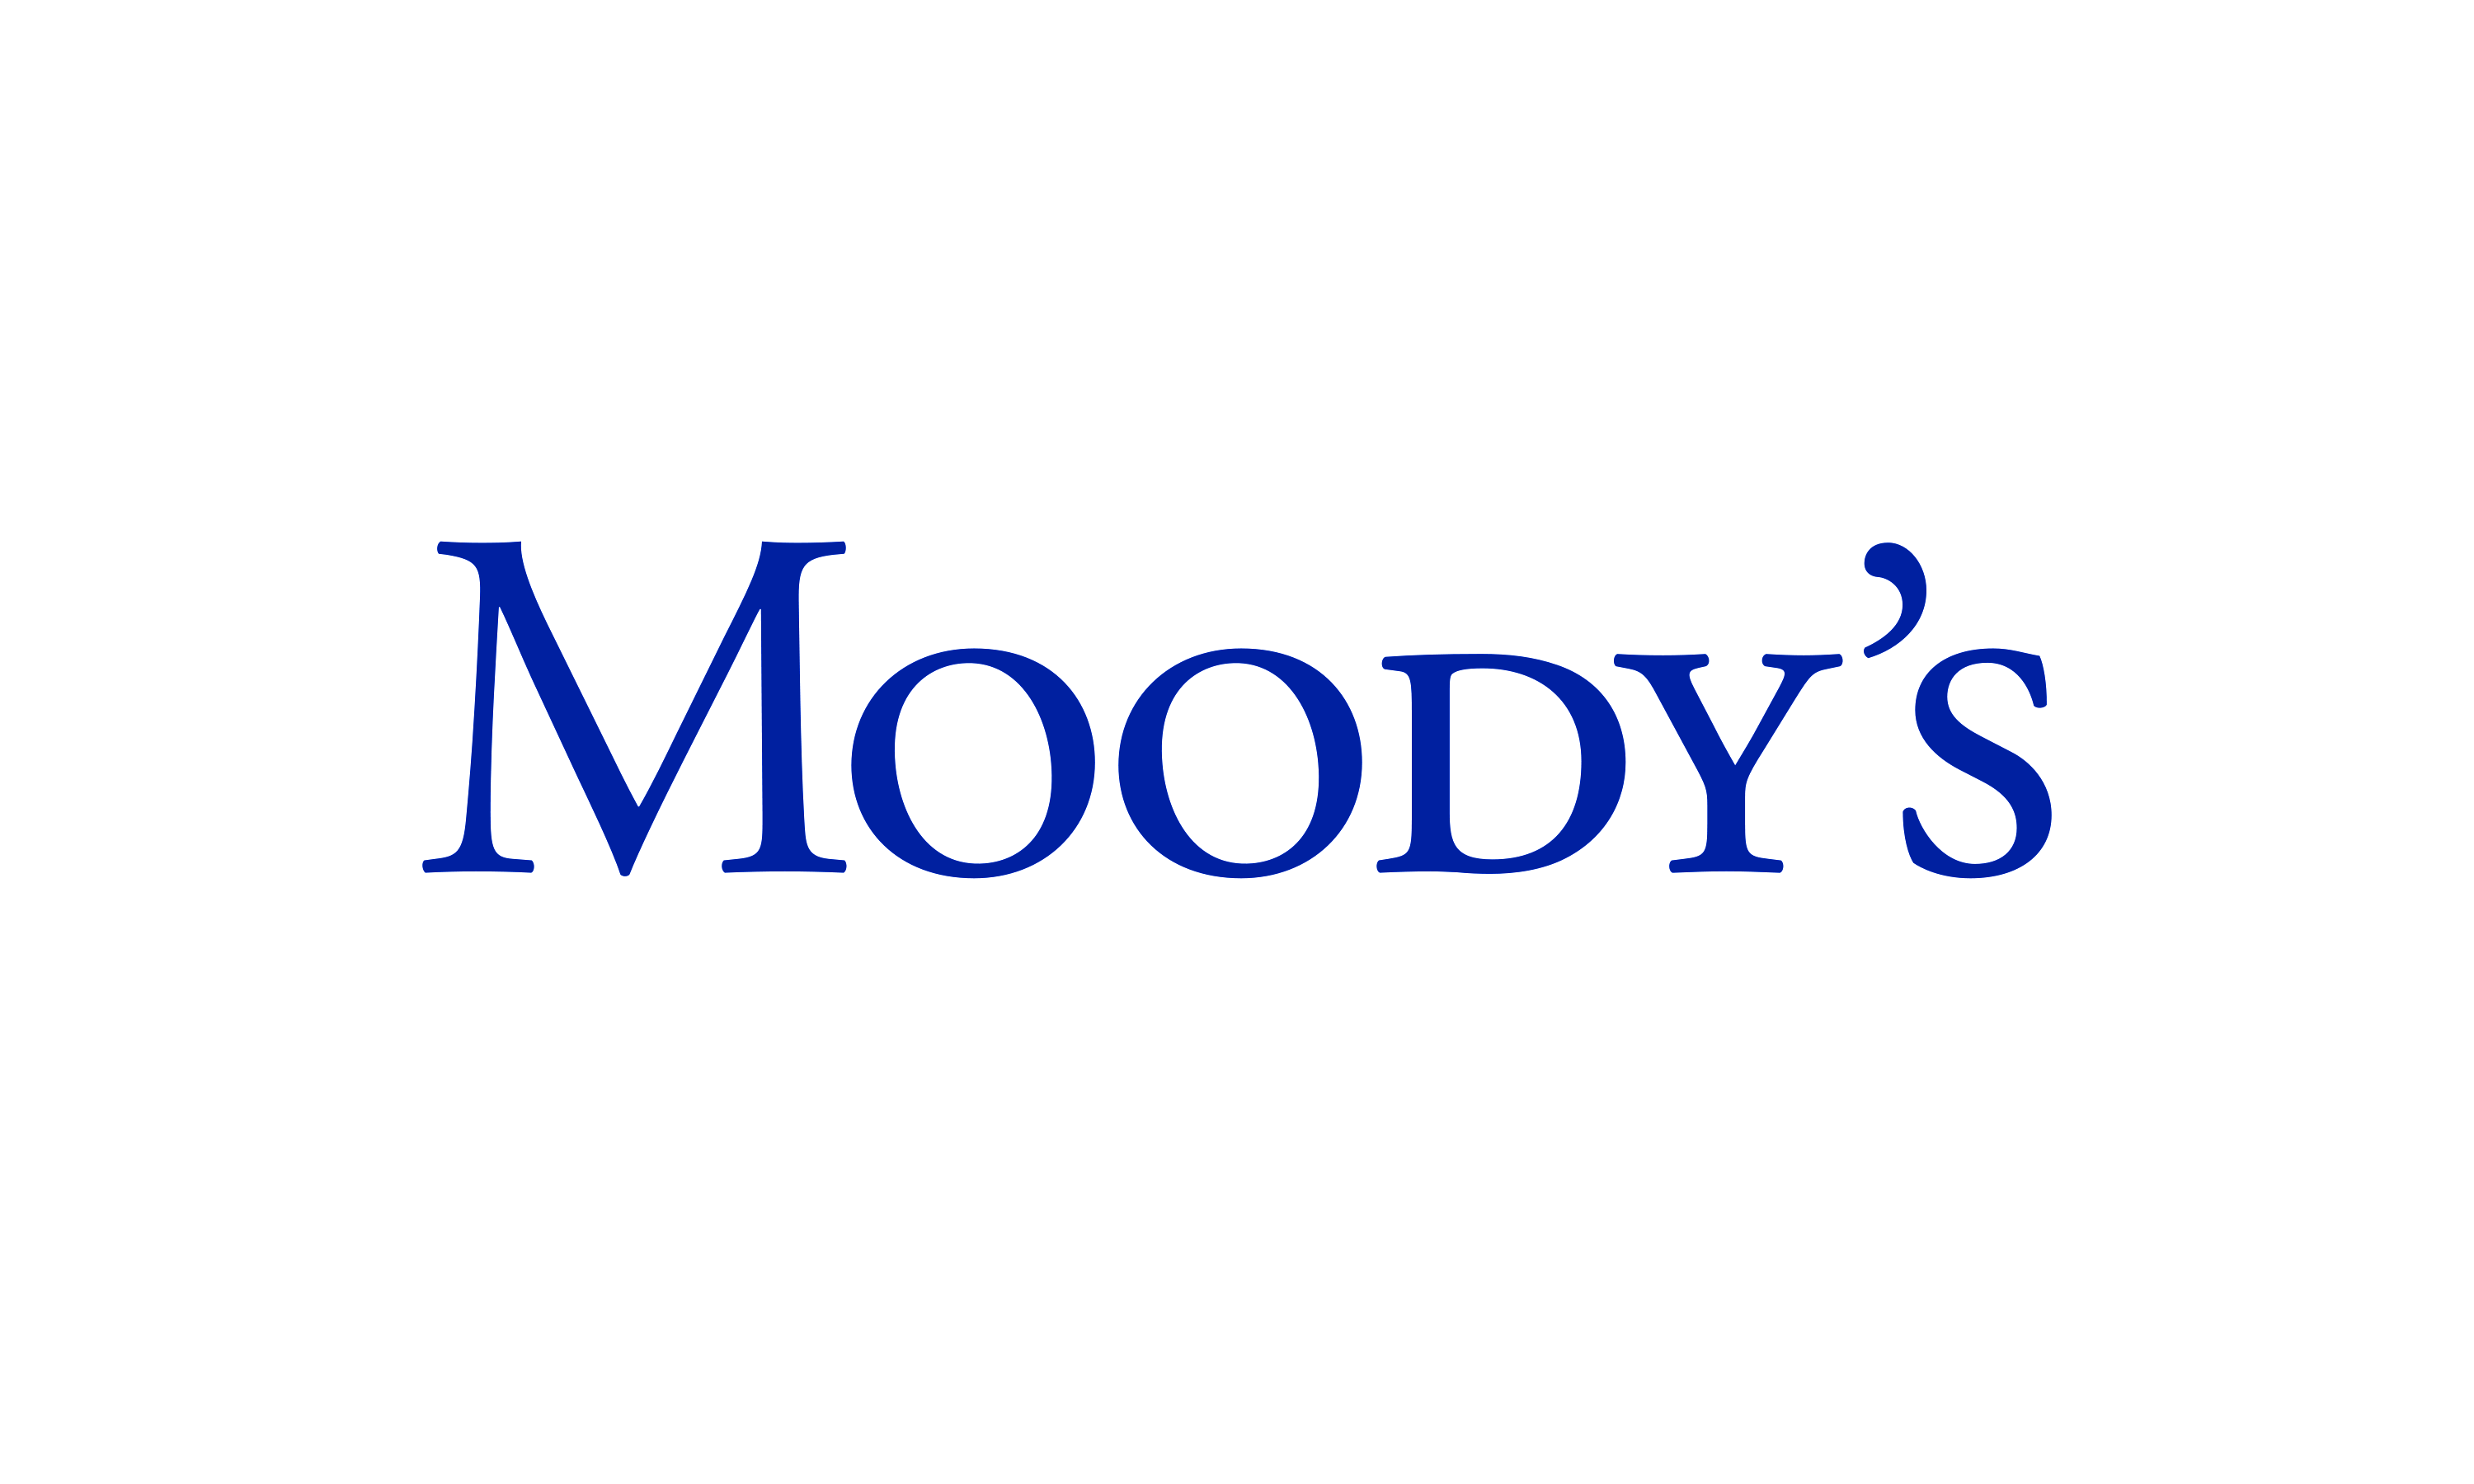 Moody's logo, Neon commissioned by Moody's